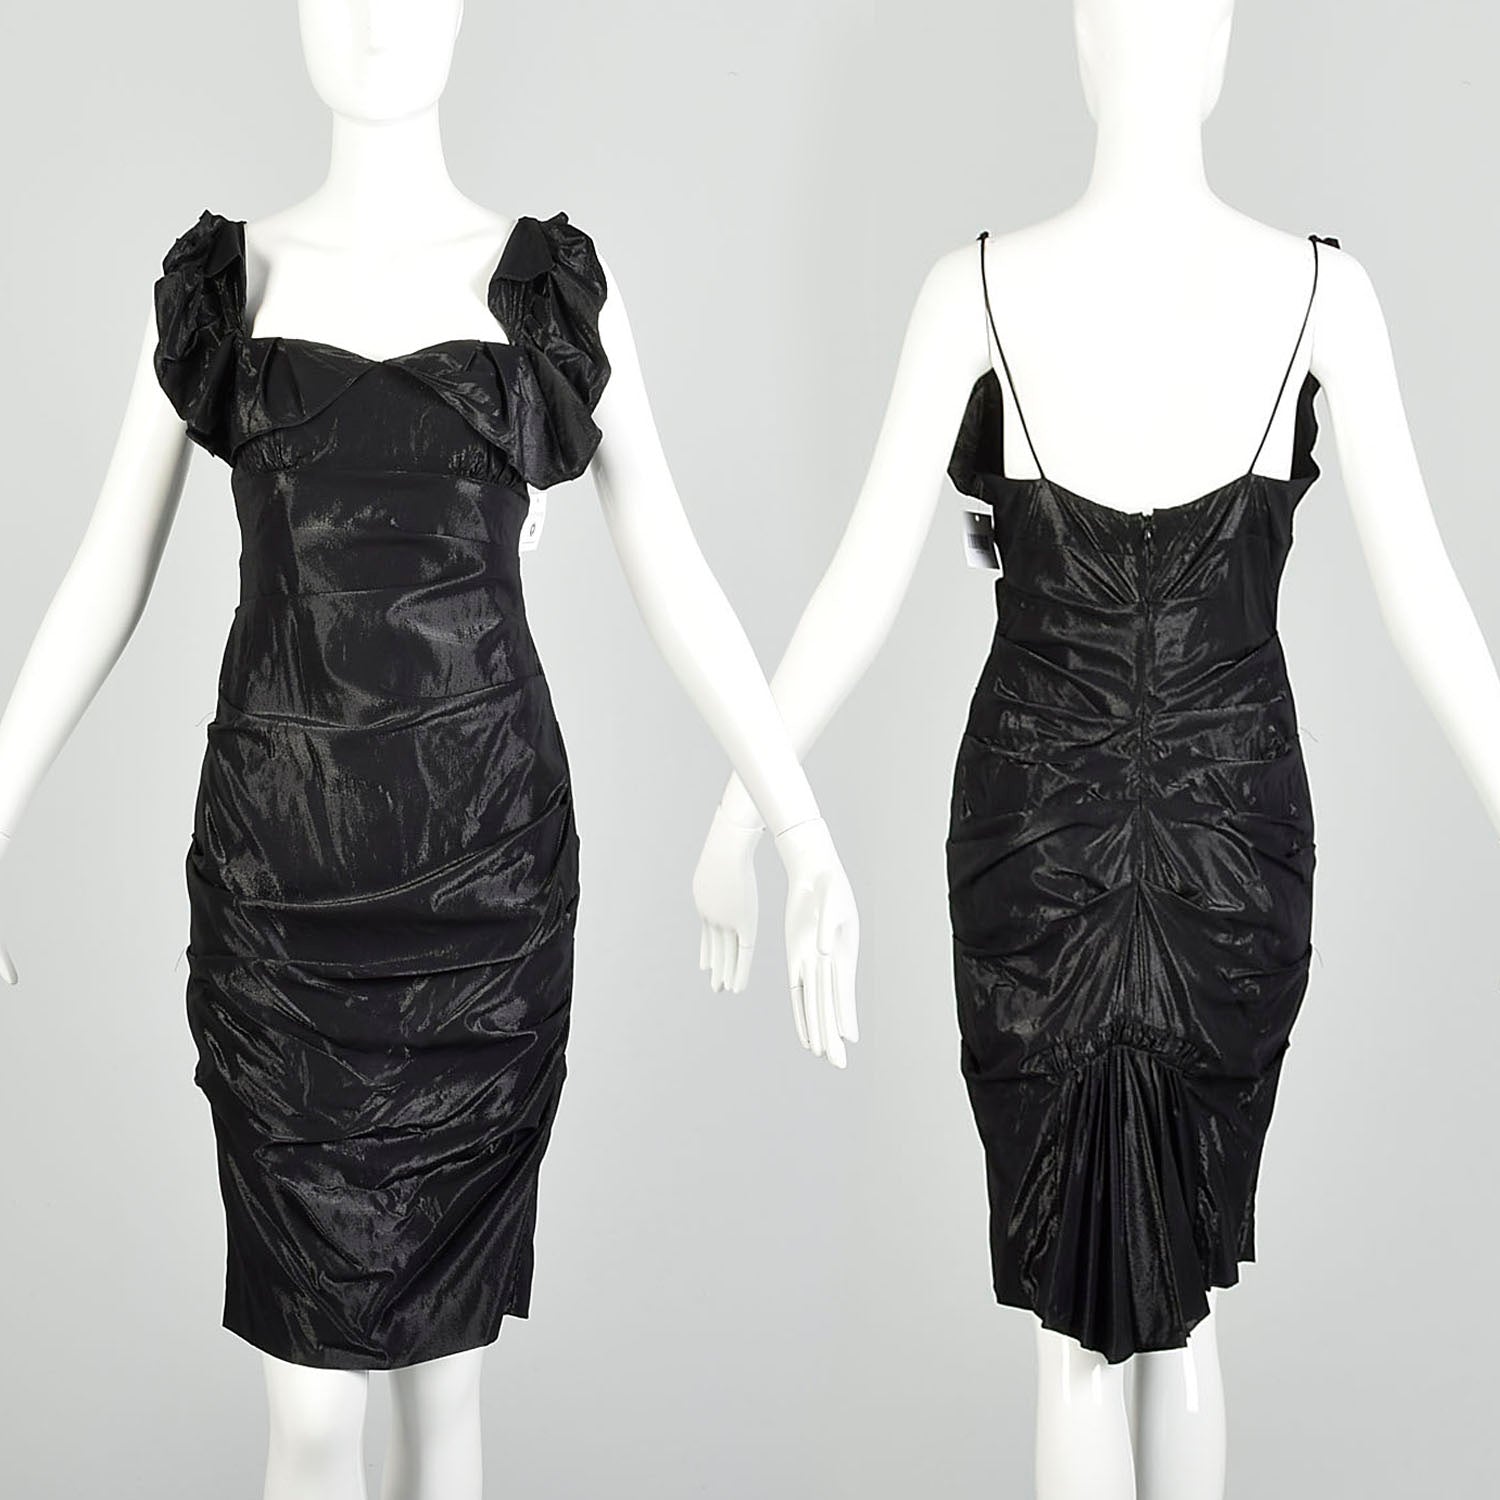 Small 2000s Nicole Miller Collection Shiny Black Lamé Cocktail Party Ruffle Evening LBD Dress